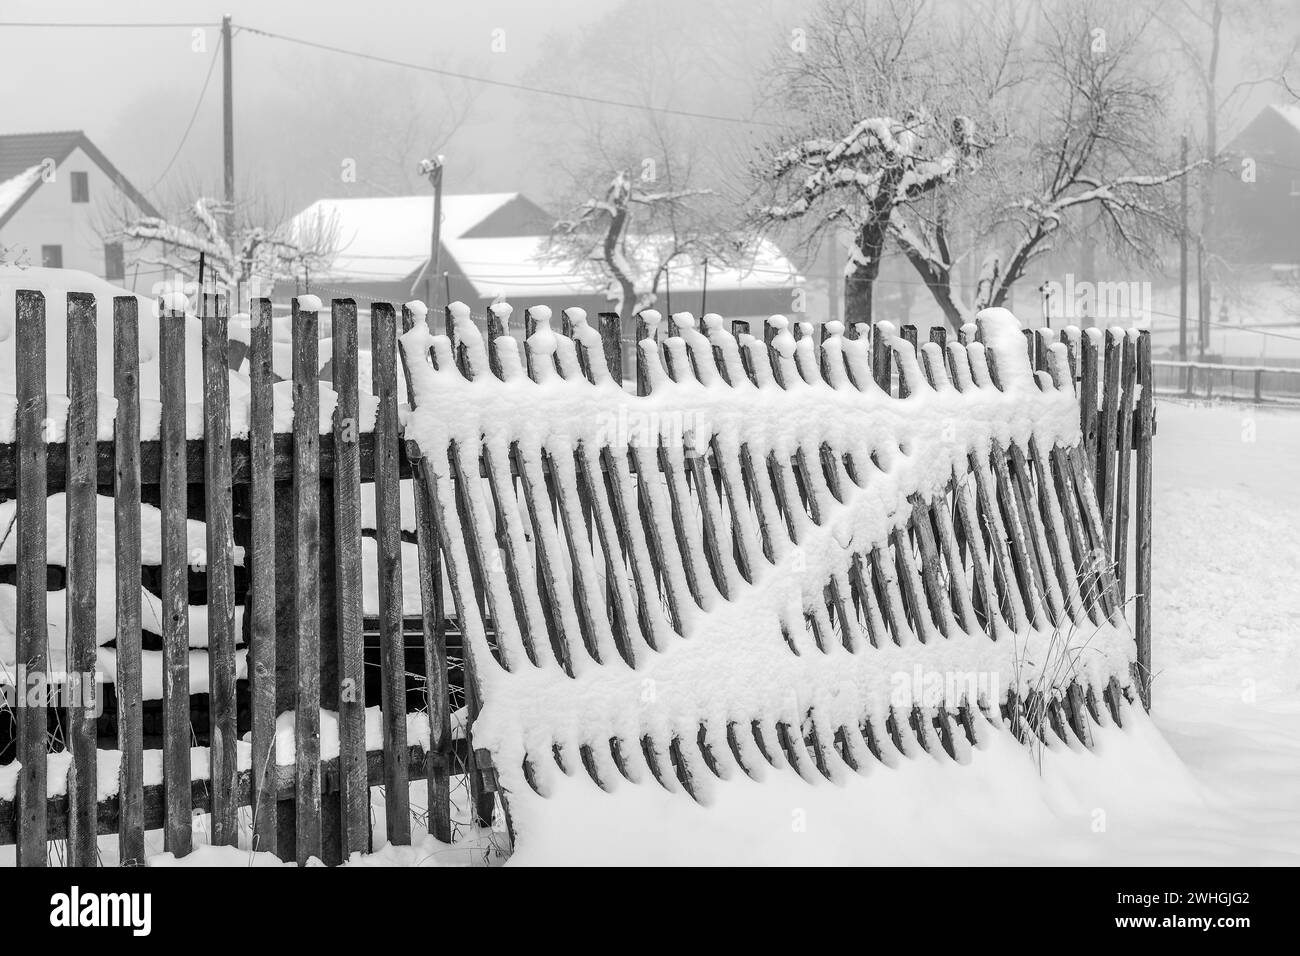 Fog in the village and a snow fence Stock Photo